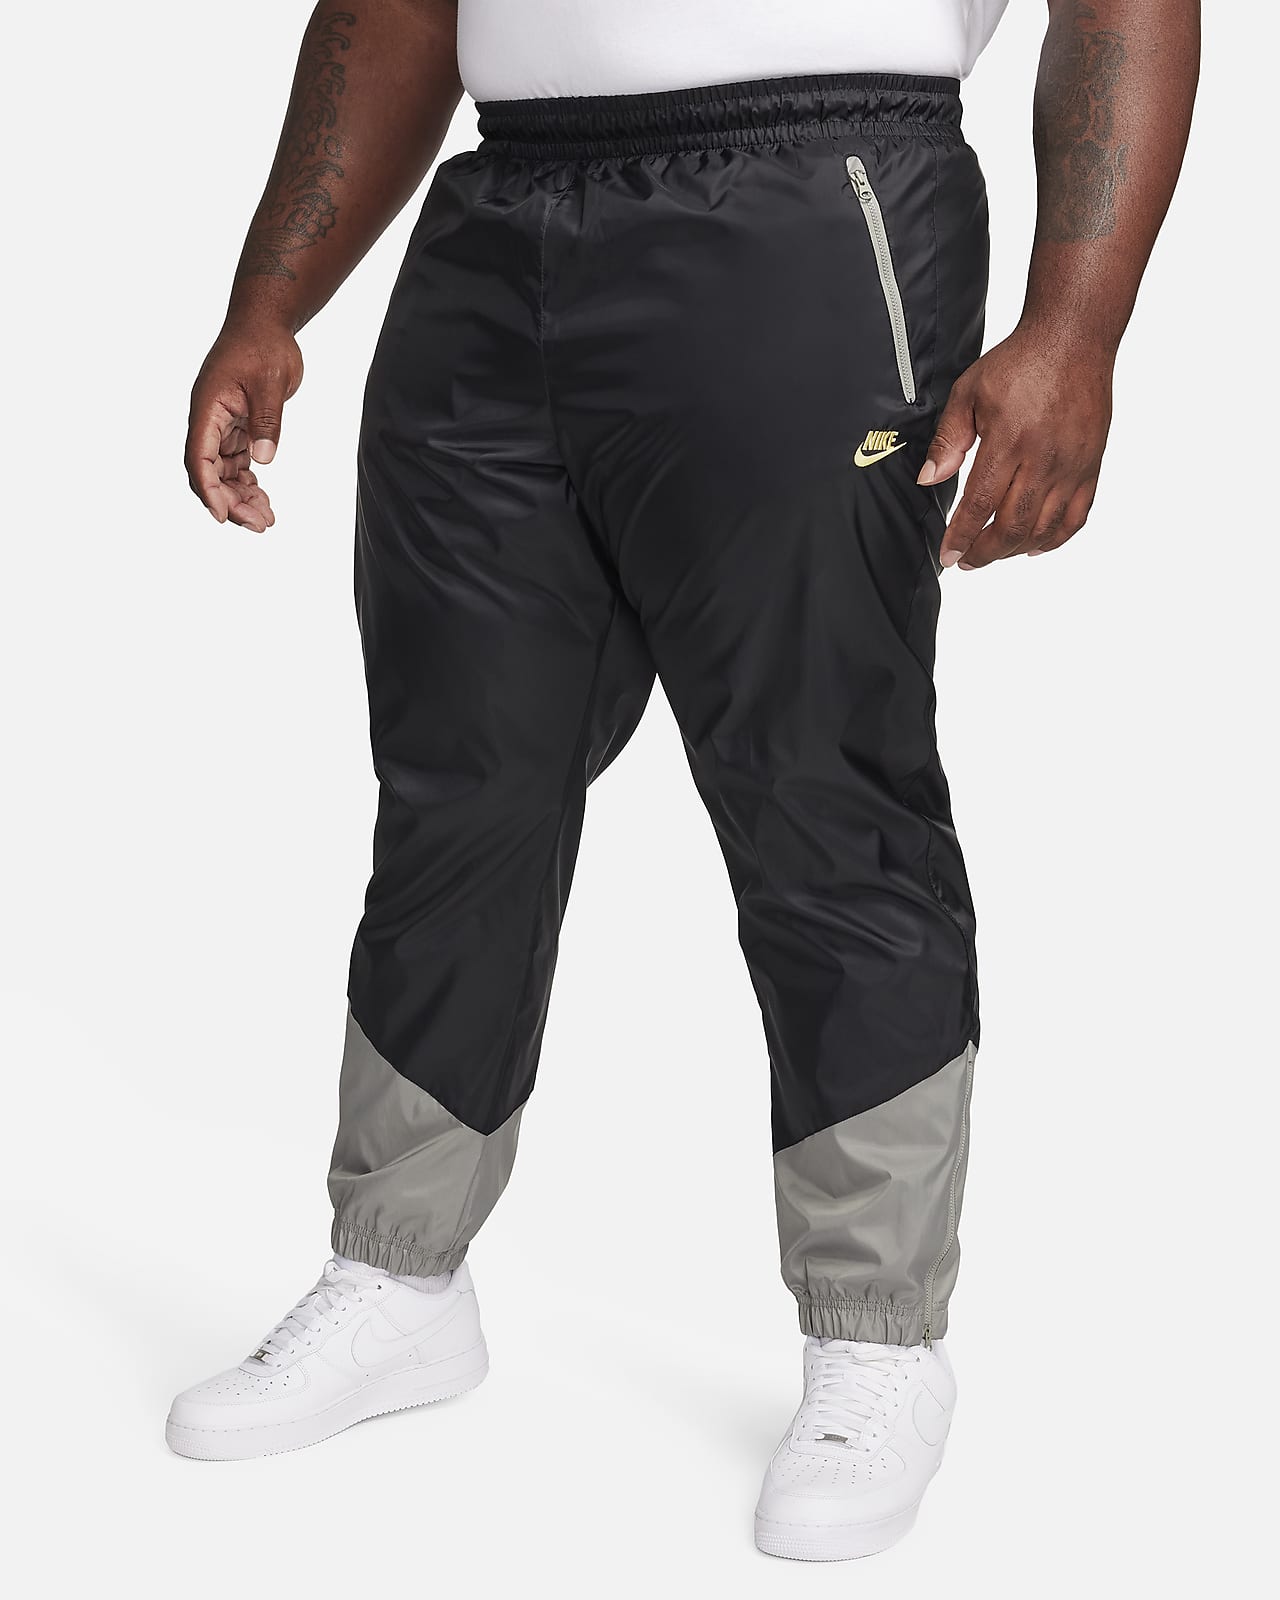 Nike Mens Joggers Tracksuit Air Woven Cuffed Bottoms Sweatpants Trouser  Size 